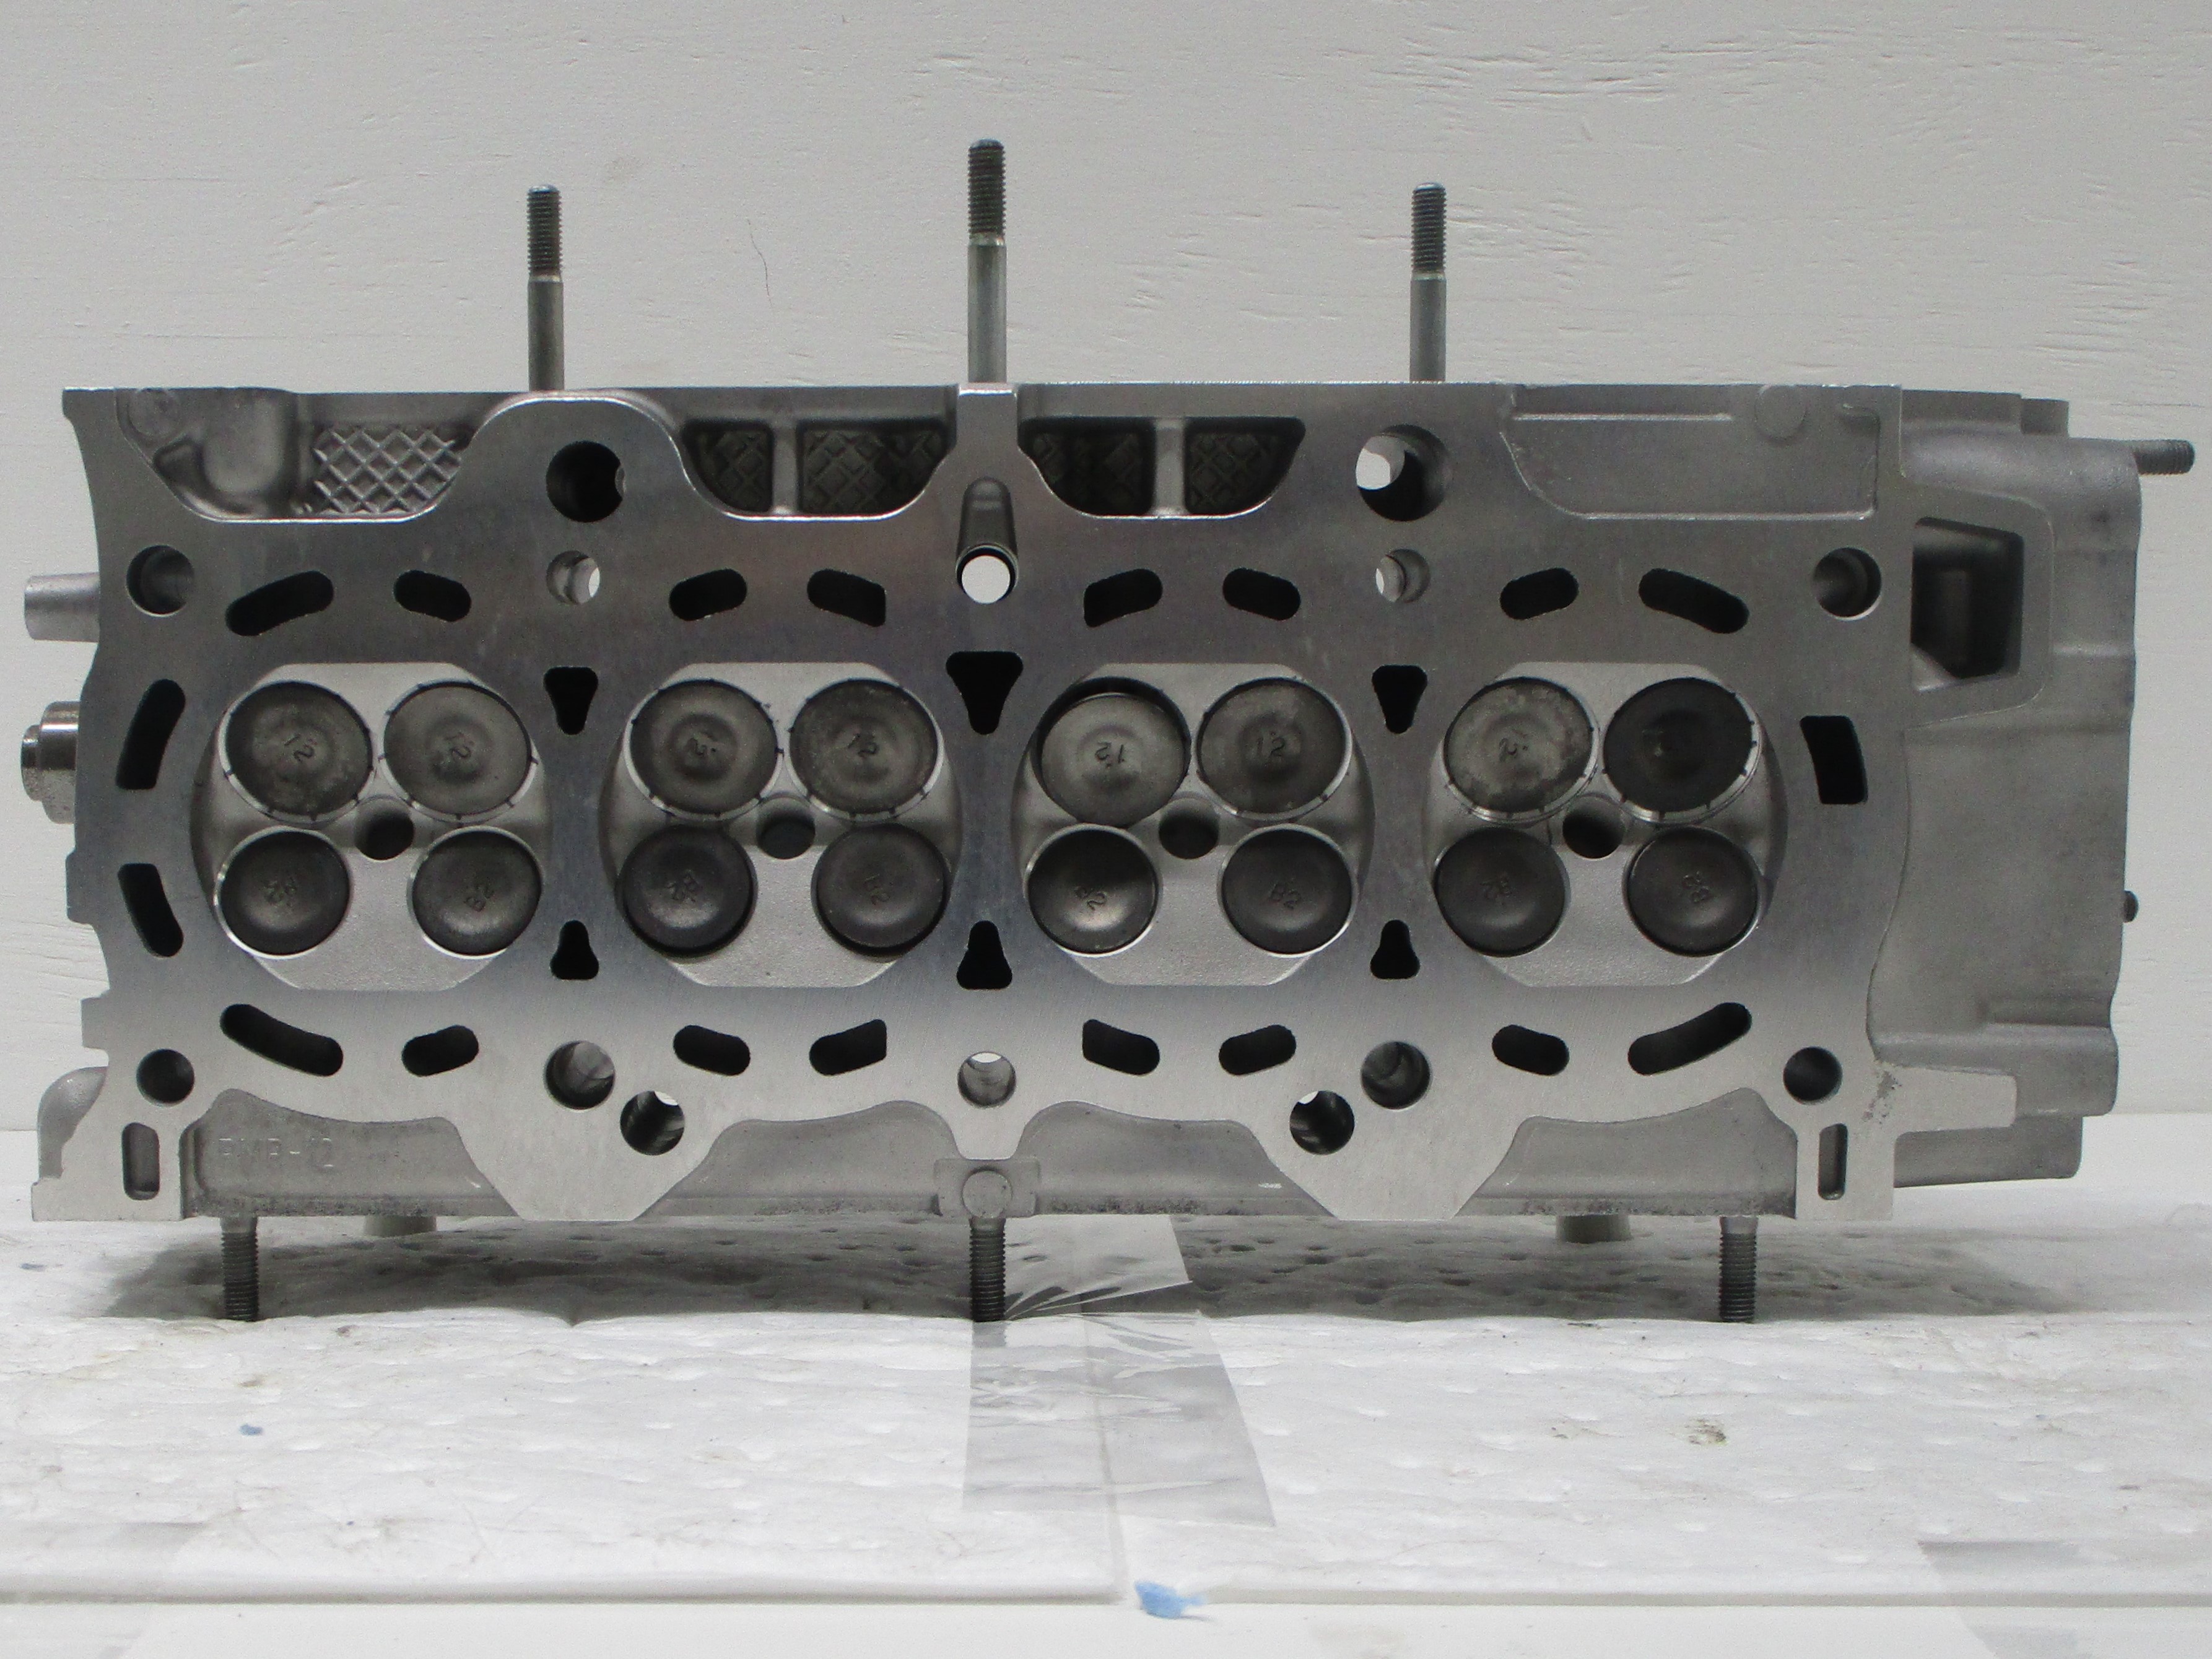 2001-2006 Honda Civic 1.7L None-VTEC (D17A1) Reconditioned Cylinder Head W/Cams- Casting #(PMR-HA-12) - ($100 Core Charge)